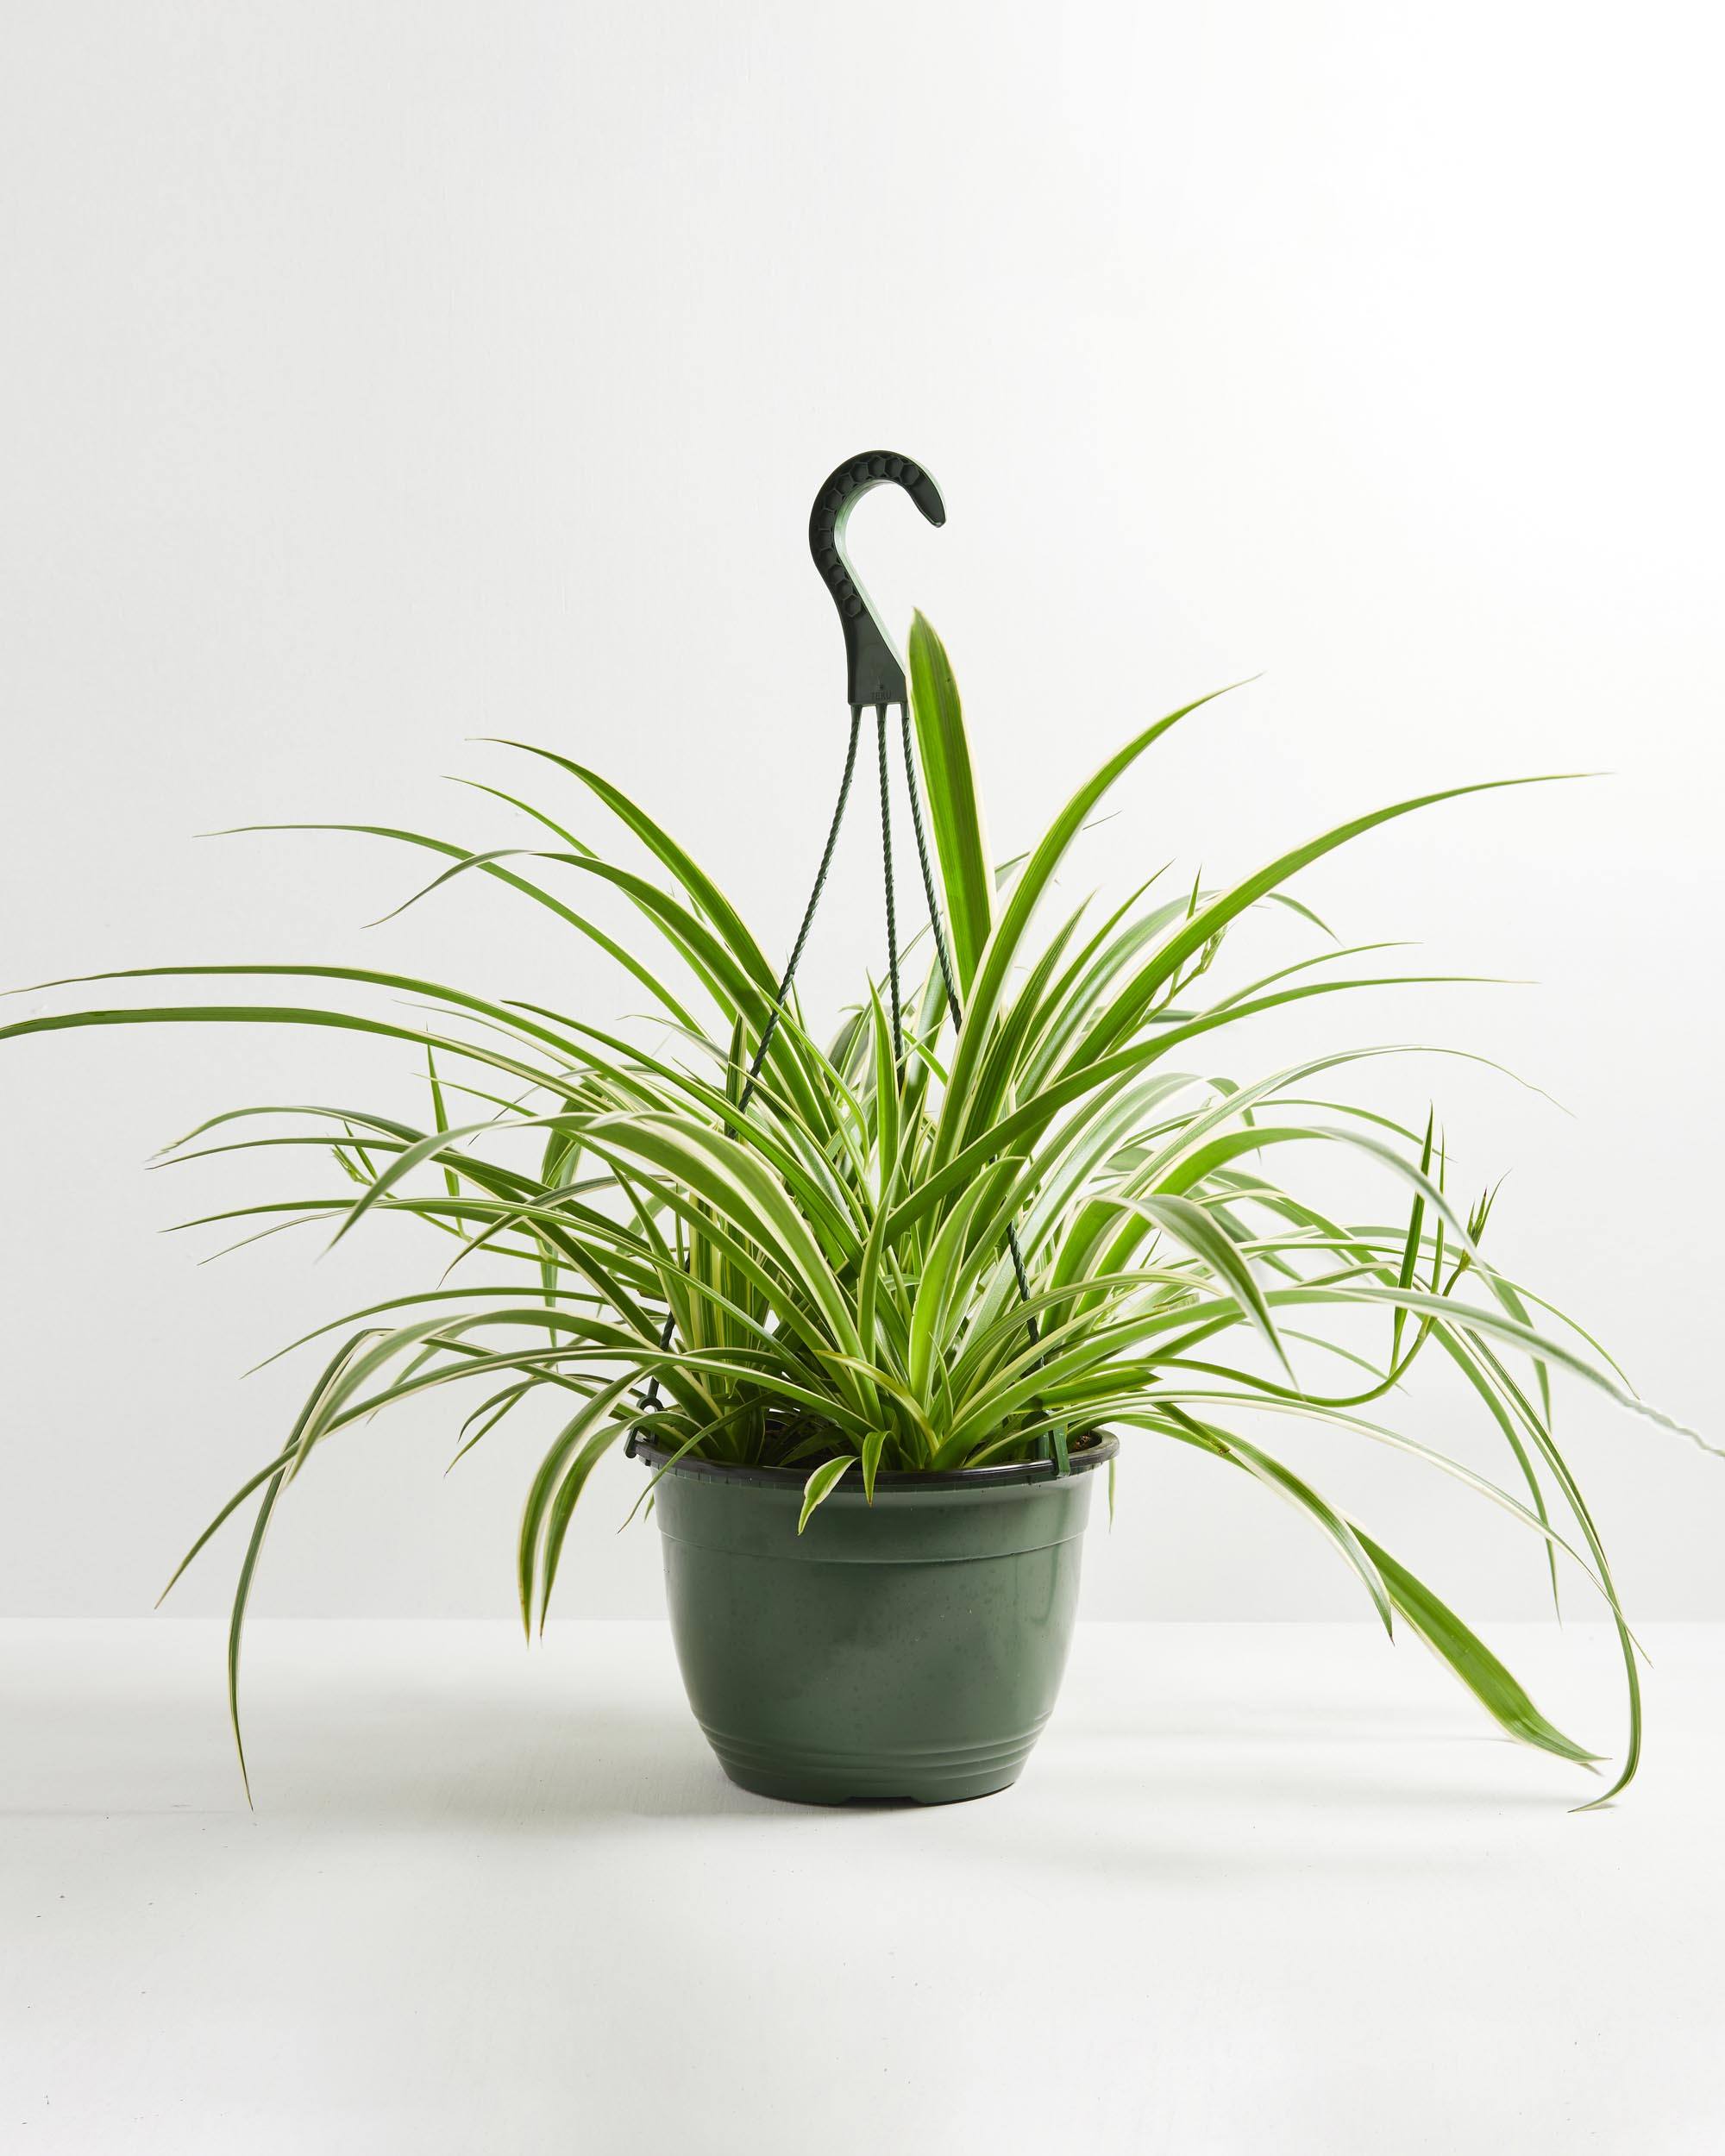 Keep Your Spider Plant Alive: Light, Water & Care Instructions